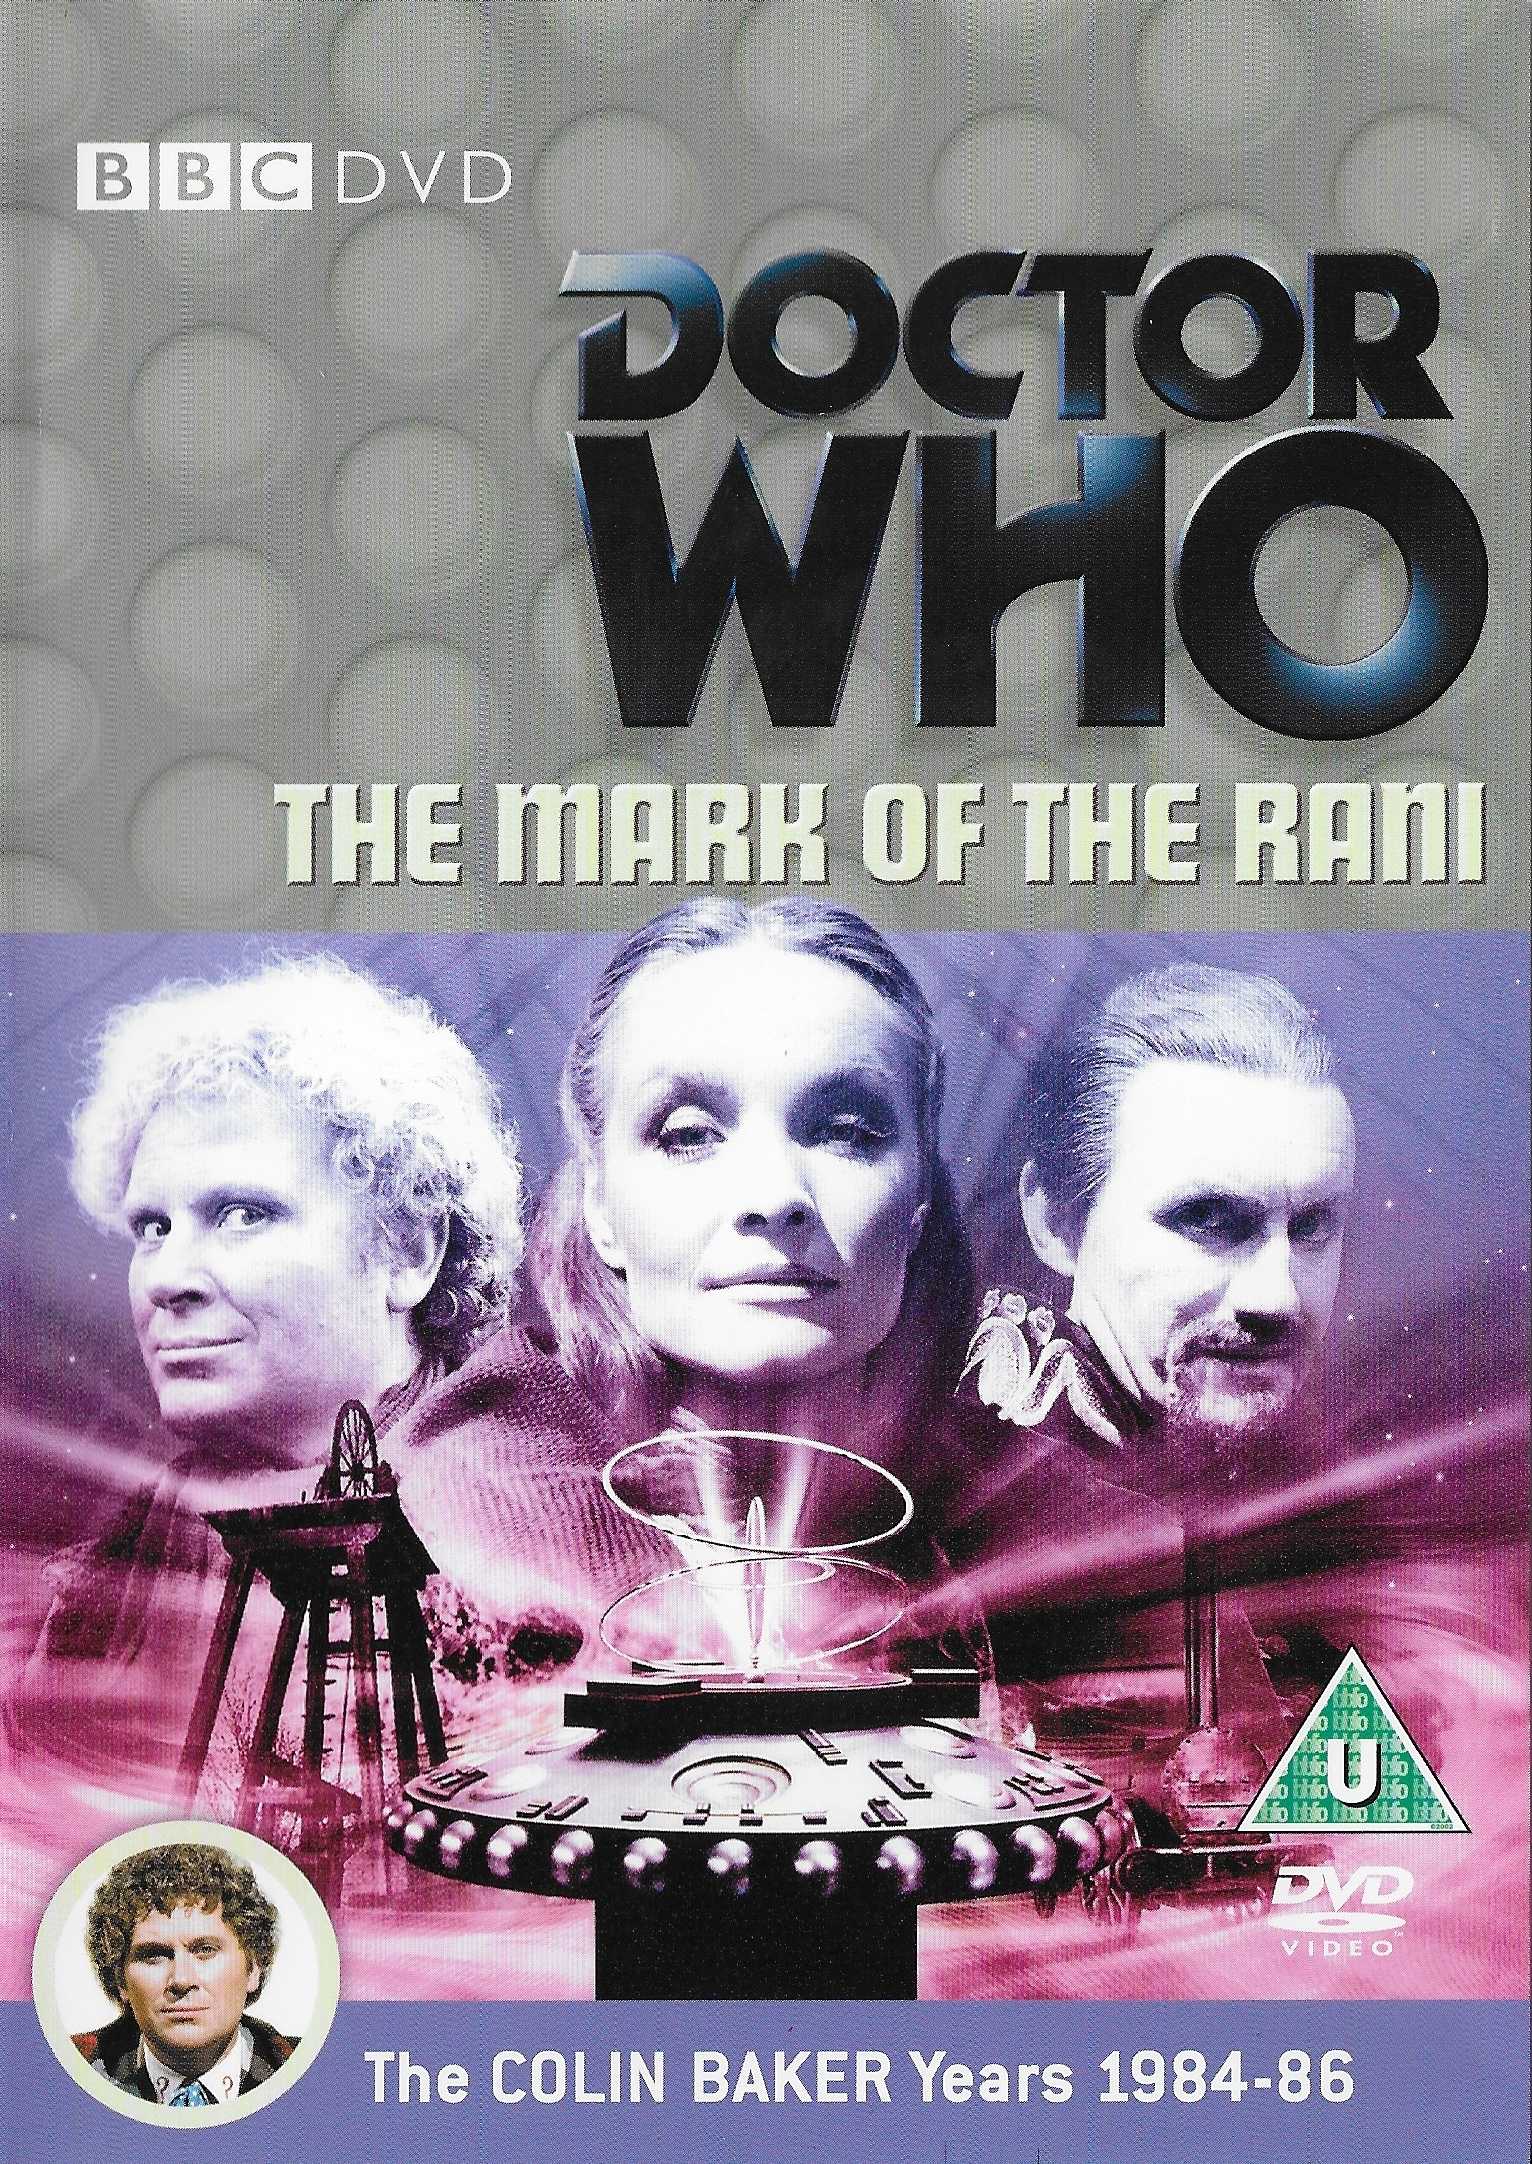 Picture of BBCDVD 2224 Doctor Who - The mark of the Rani by artist Pip and Jane Baker from the BBC records and Tapes library